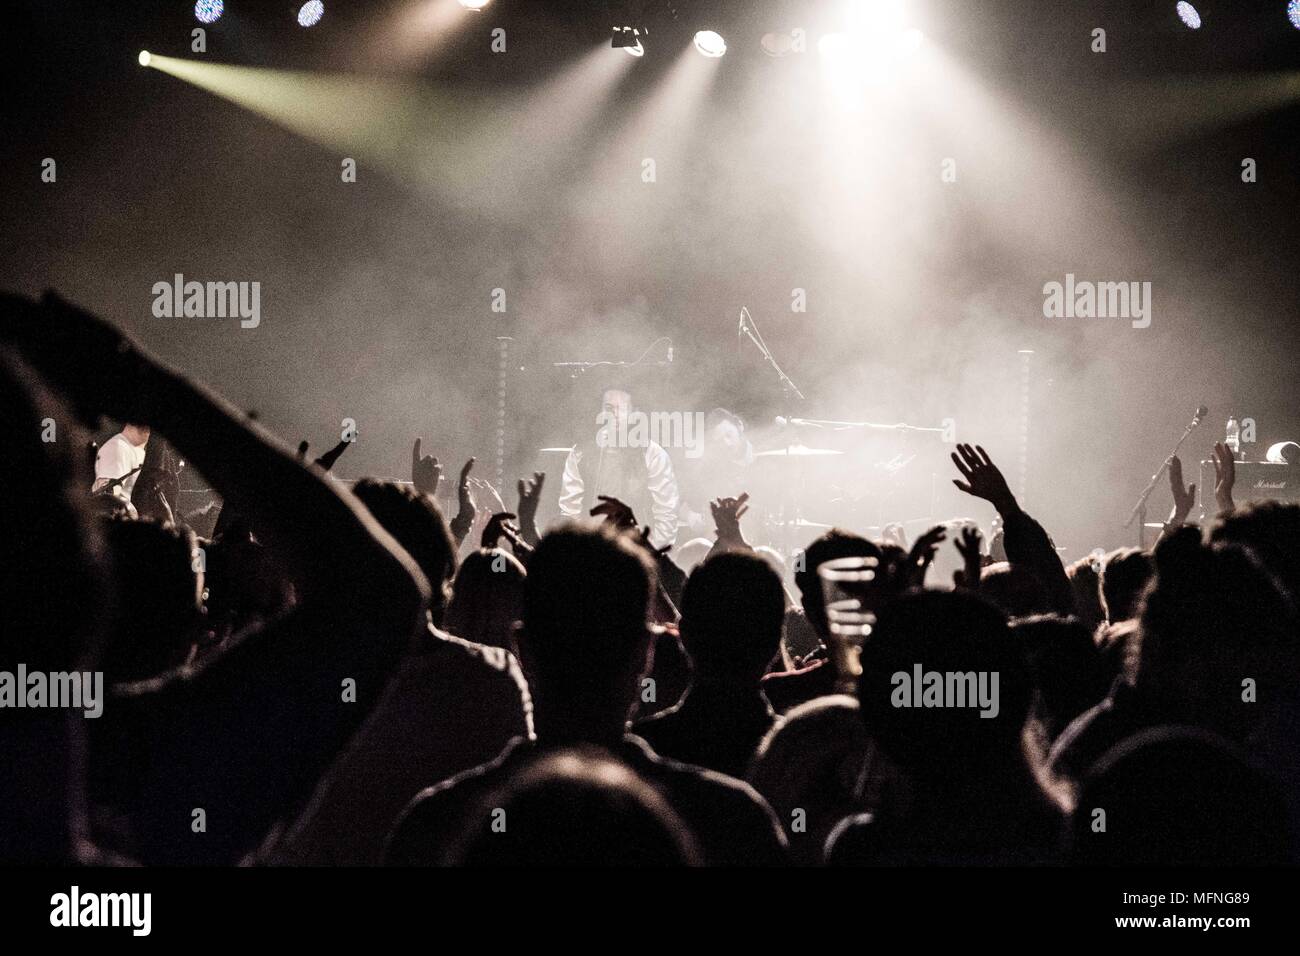 People having fun at a concert, looking to the stage, hands in the air, music has been gone for a long time, getting back to shows, gigs, live events Stock Photo